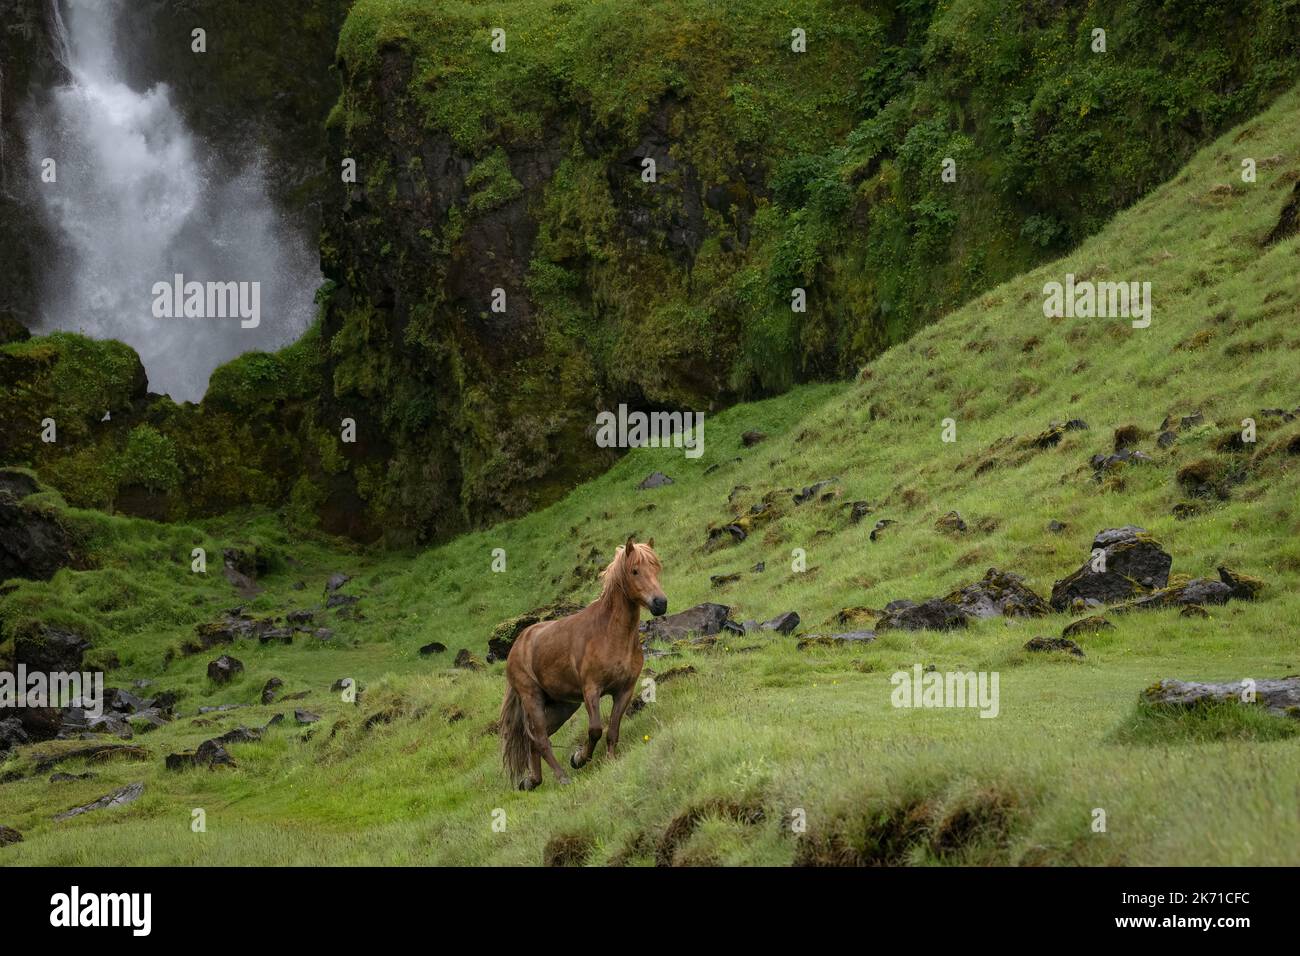 Icelandic horse walking on a green hillside in front of a waterfall Stock Photo